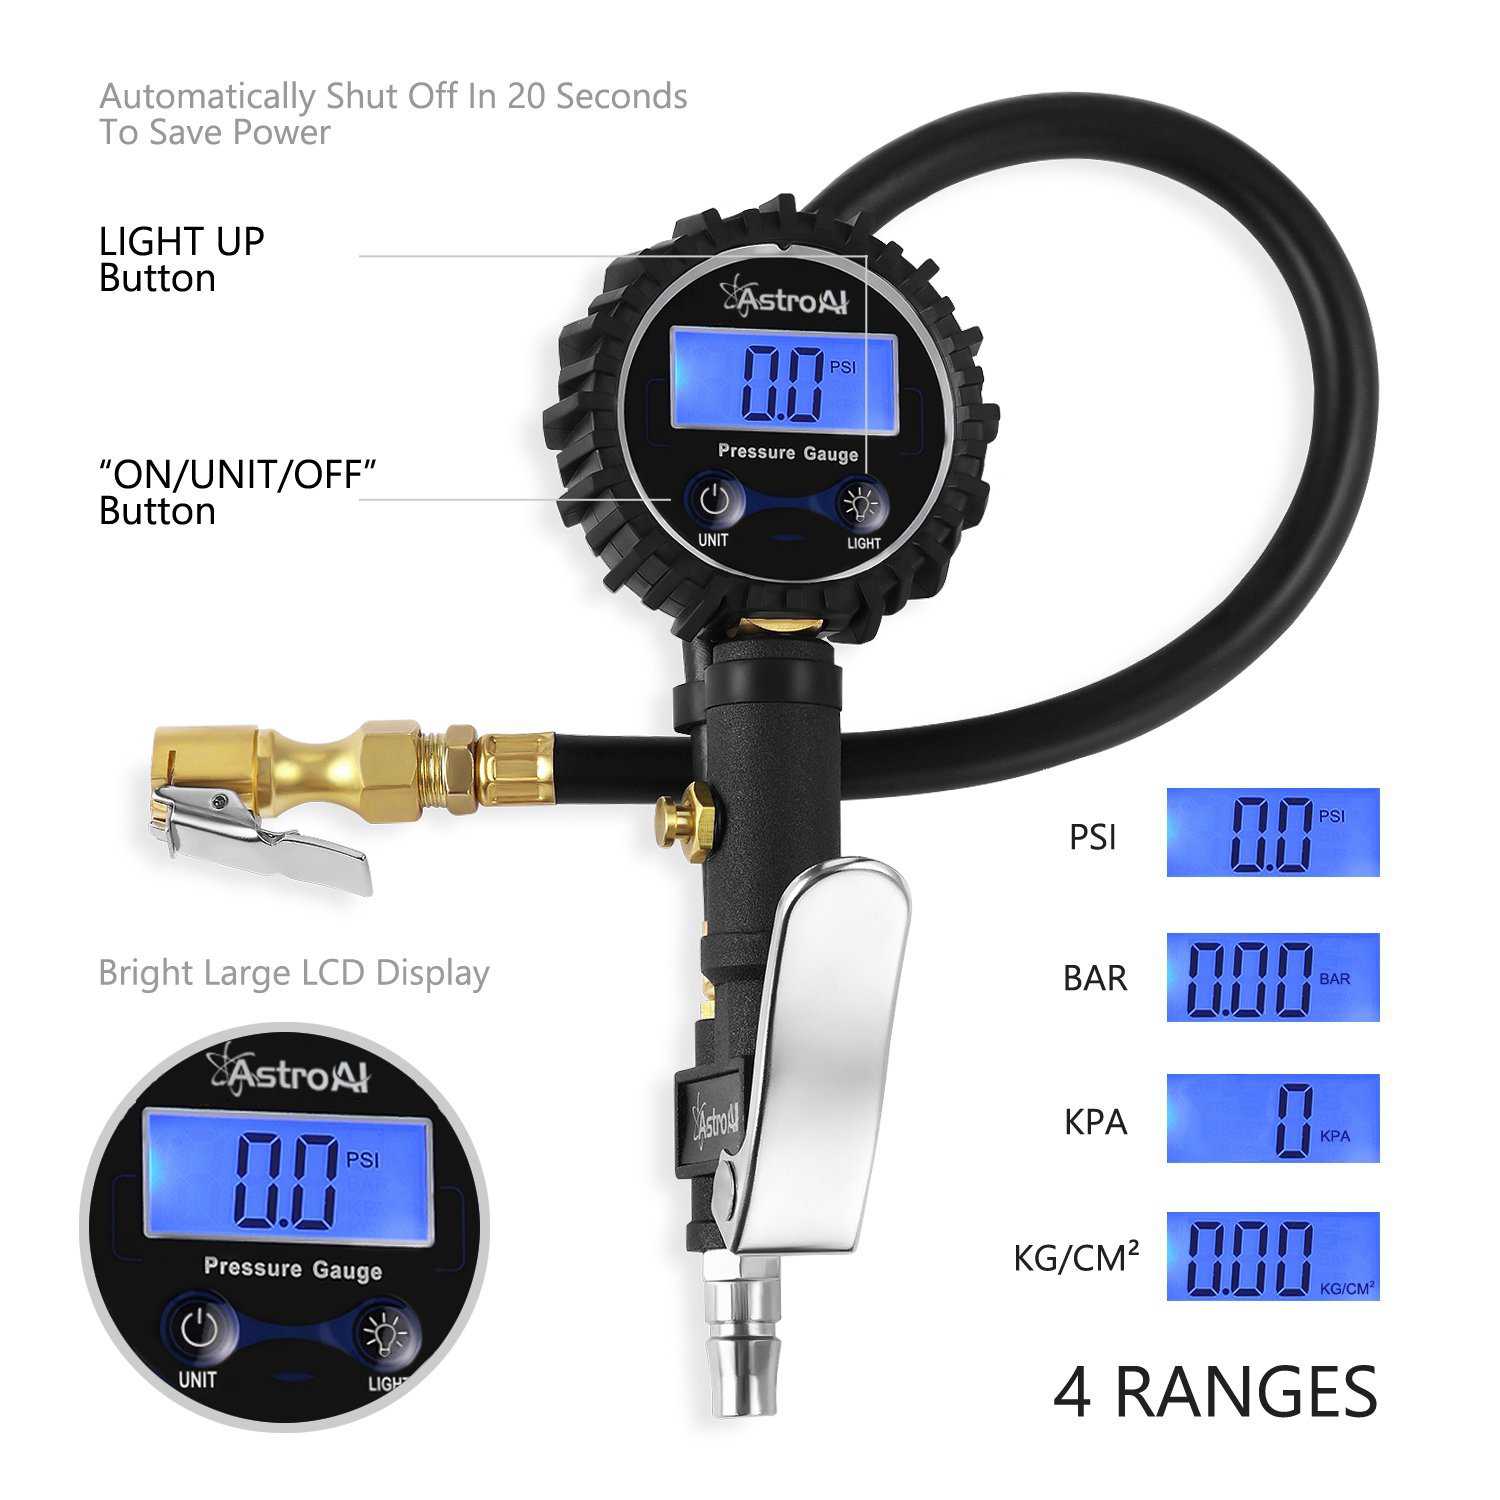 AstroAI Digital Tire Inflator with Pressure Gauge, 250 PSI Air Chuck and Compressor Accessories Heavy Duty with Rubber Hose and Quick Connect Coupler for 0.1 Display Resolution , Black